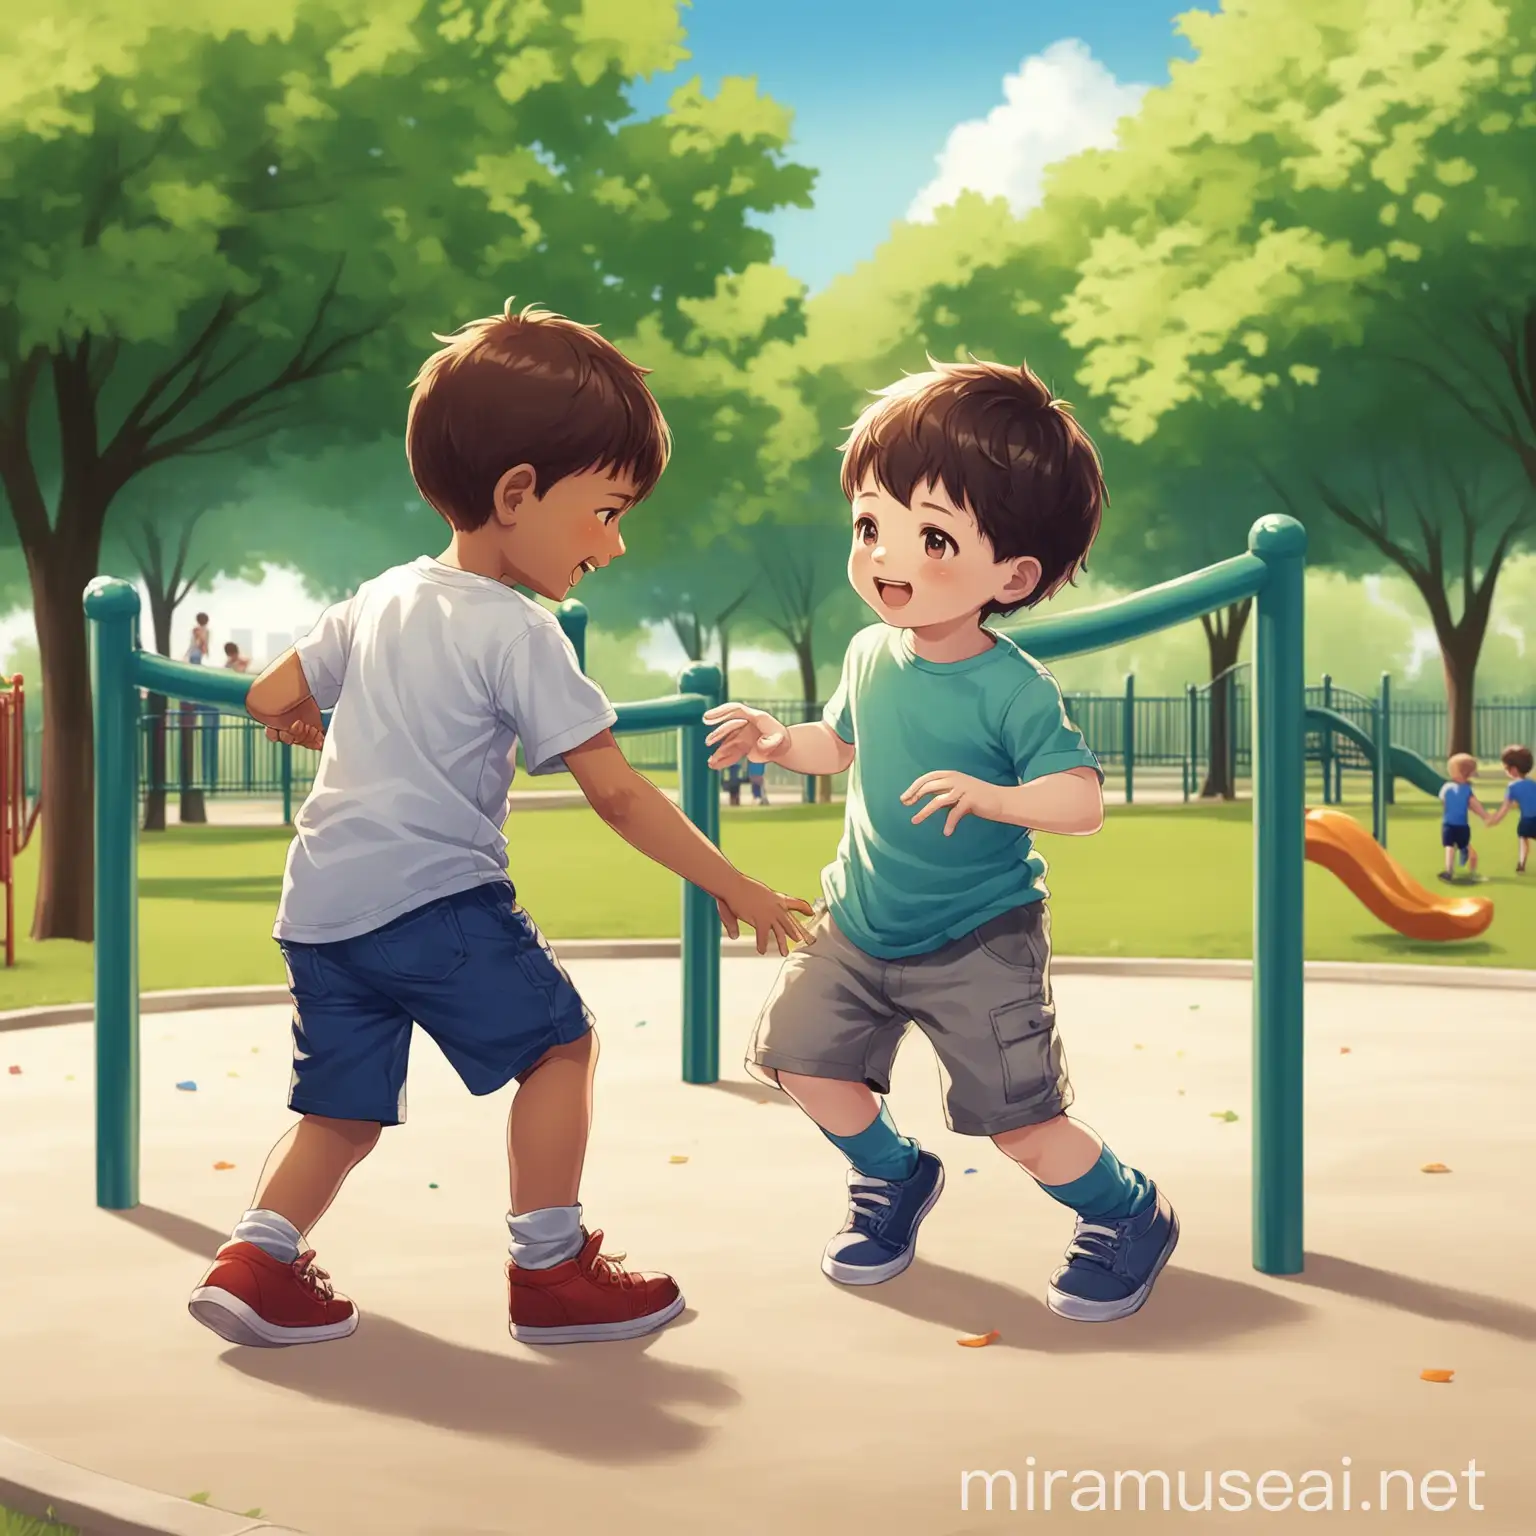 2 boys playing at the park